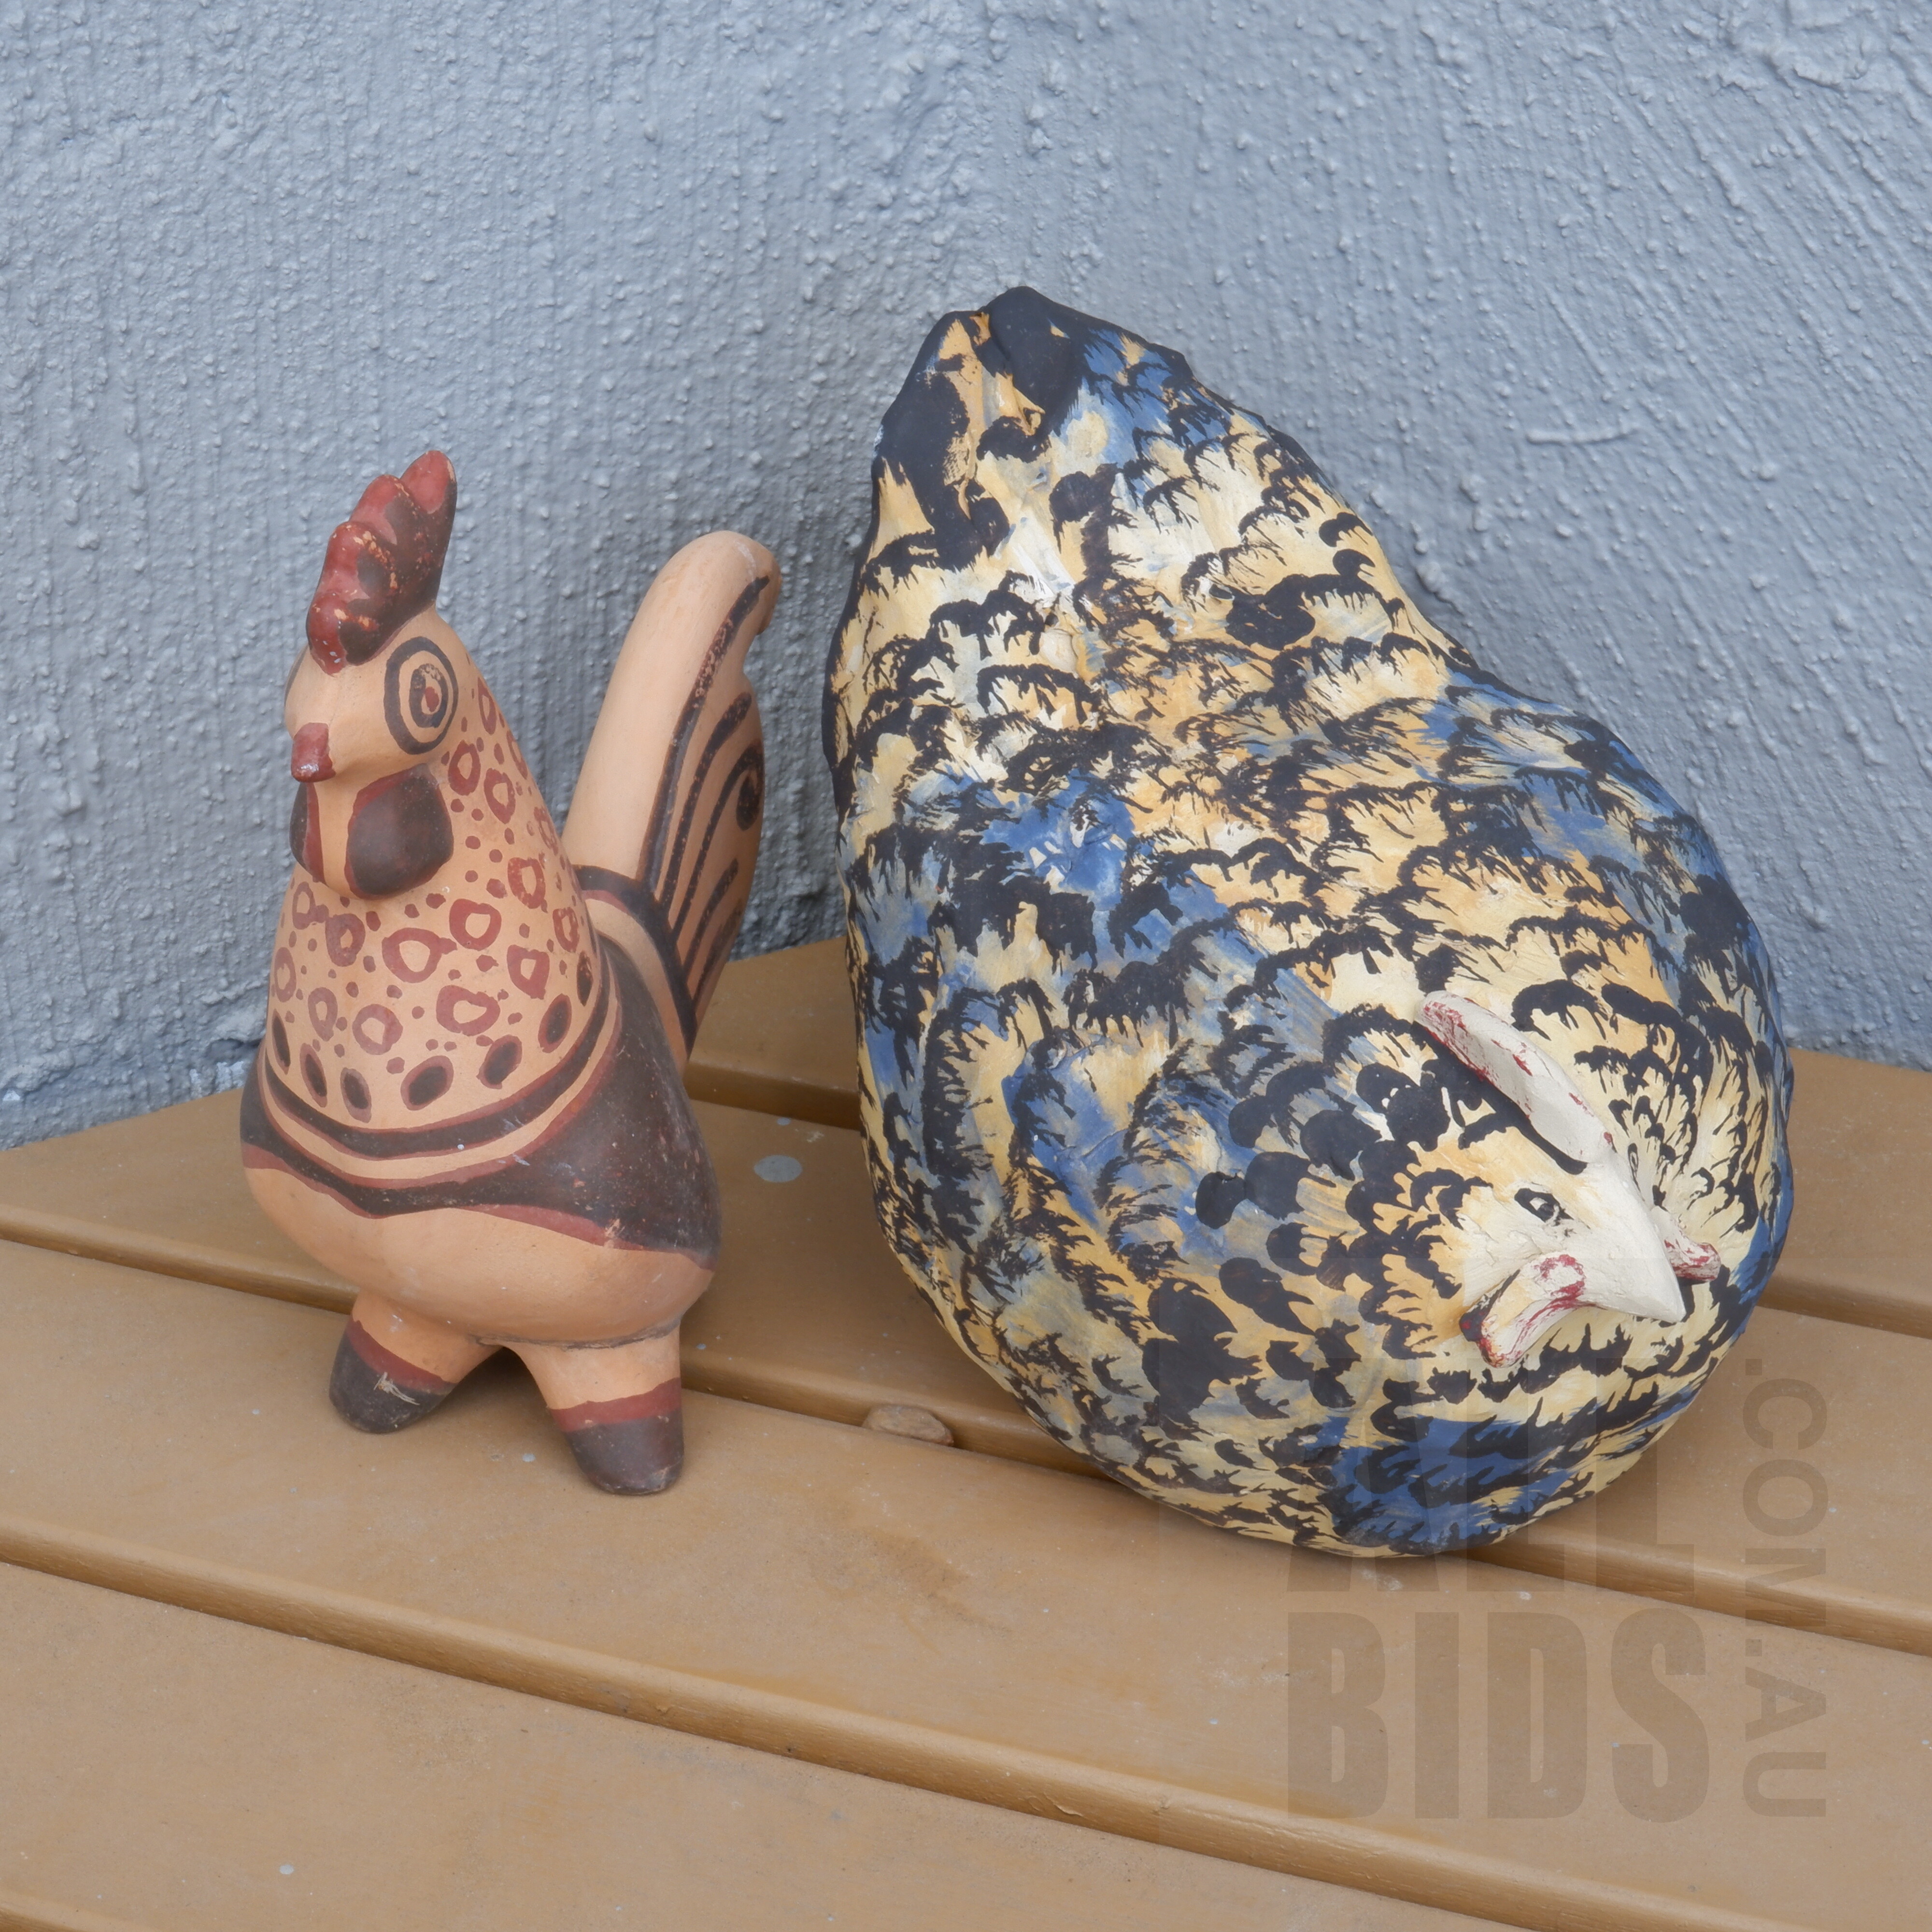 'Painted Terracotta Rooster and Another Painter Ceramic Rooster'